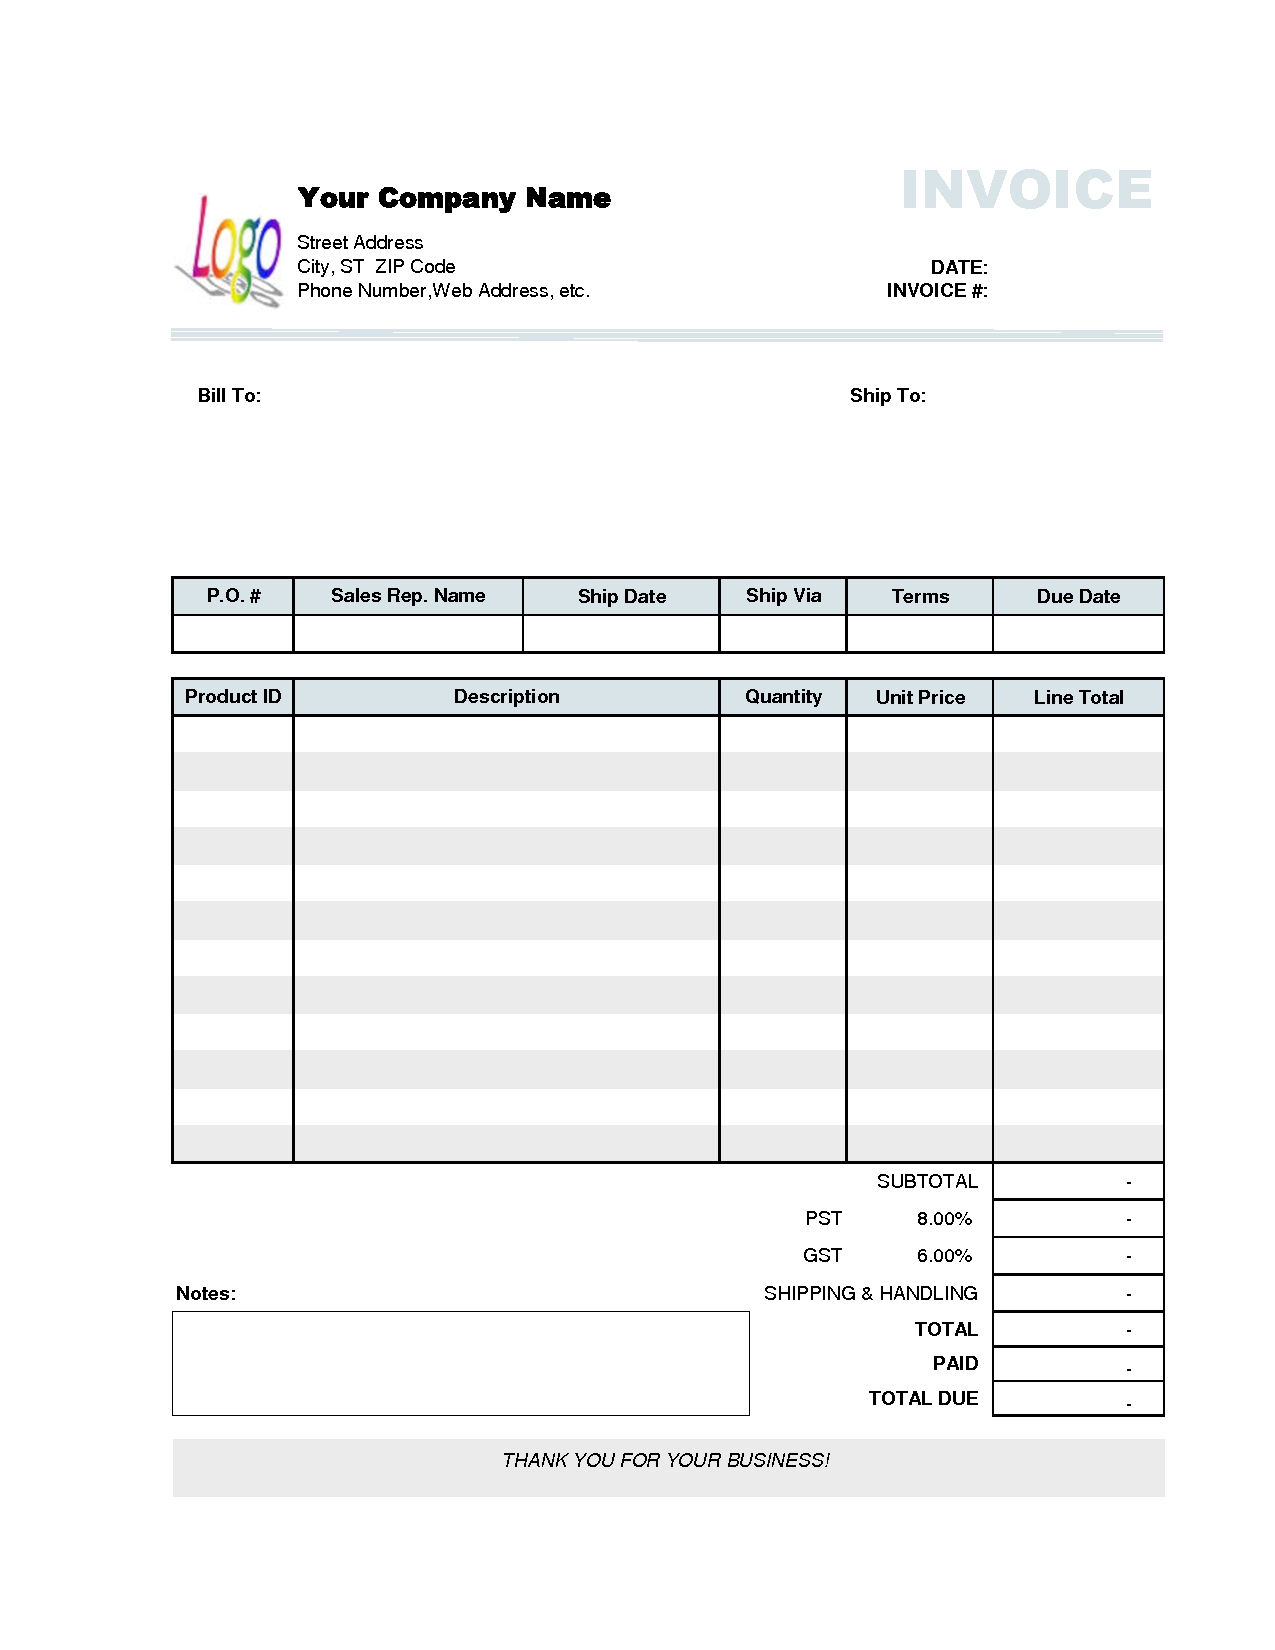 Typical Invoice Layout * Invoice Template Ideas